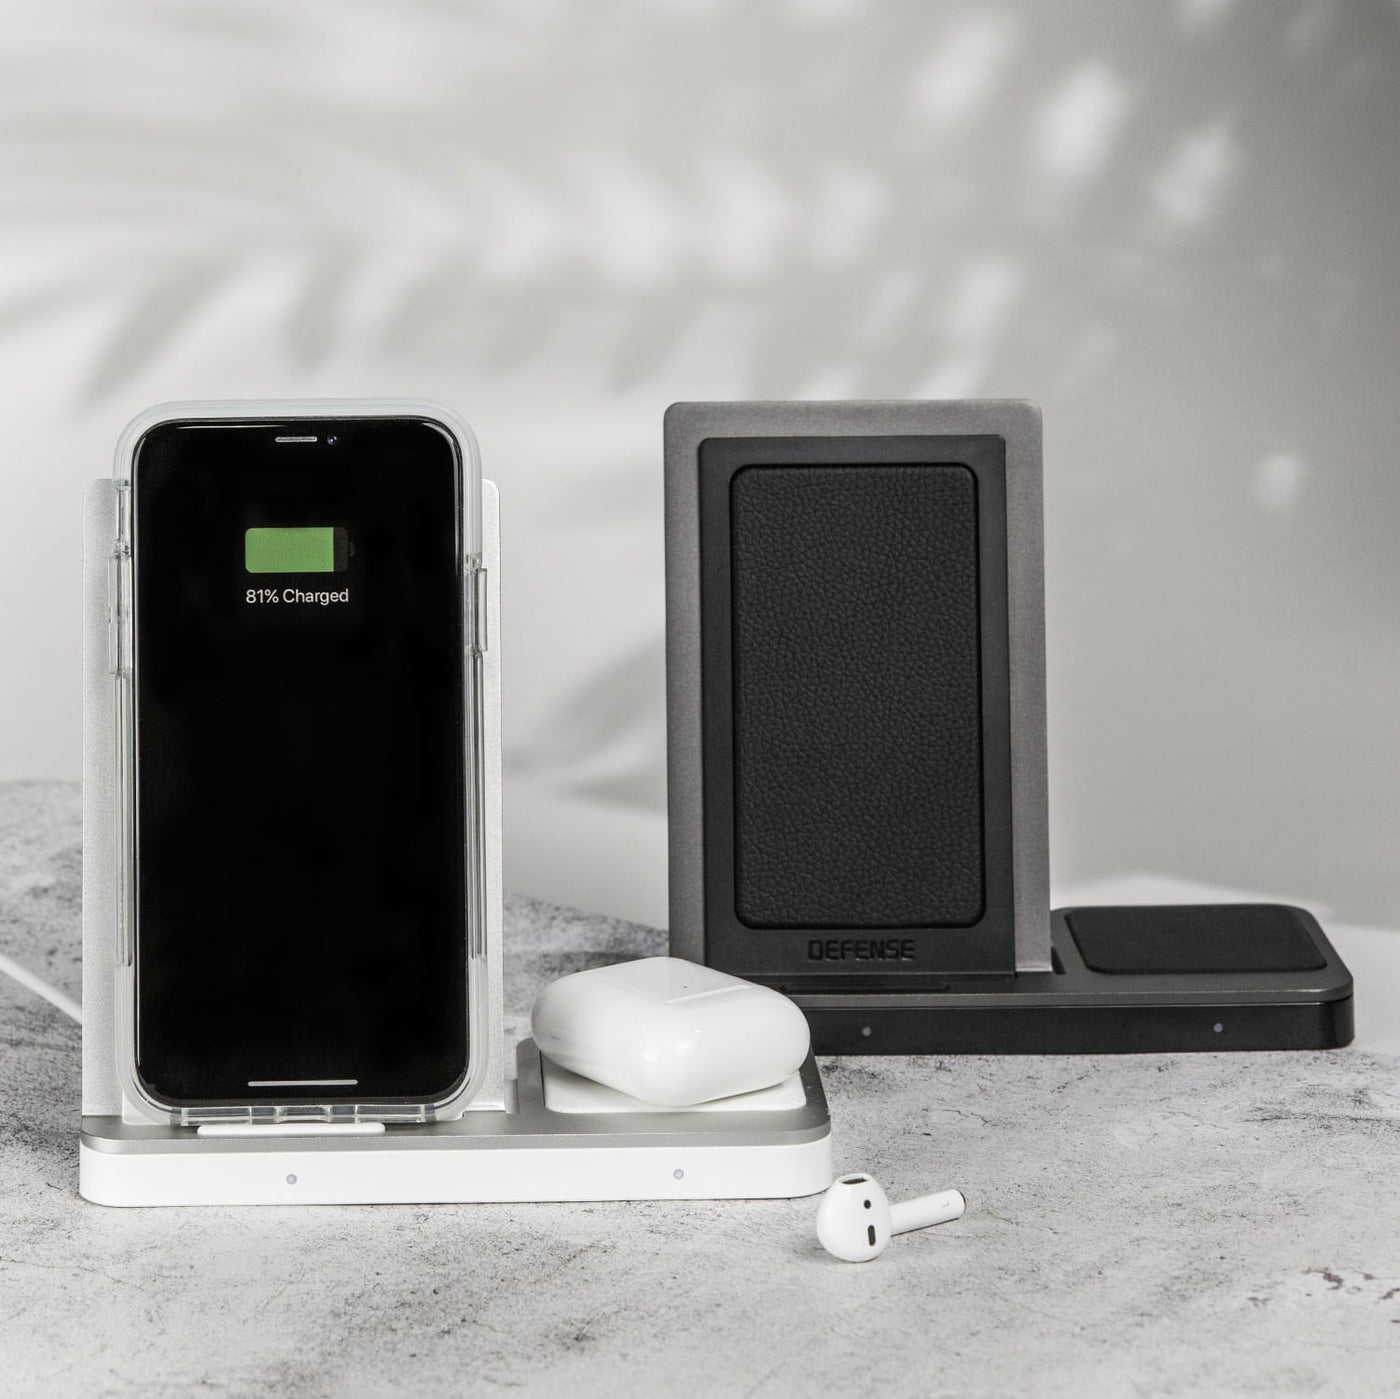 10W Wireless Qi Charger with 2 spots to recharge your iPhone and AirPods simultaneously. Raptic Duo in black and white.